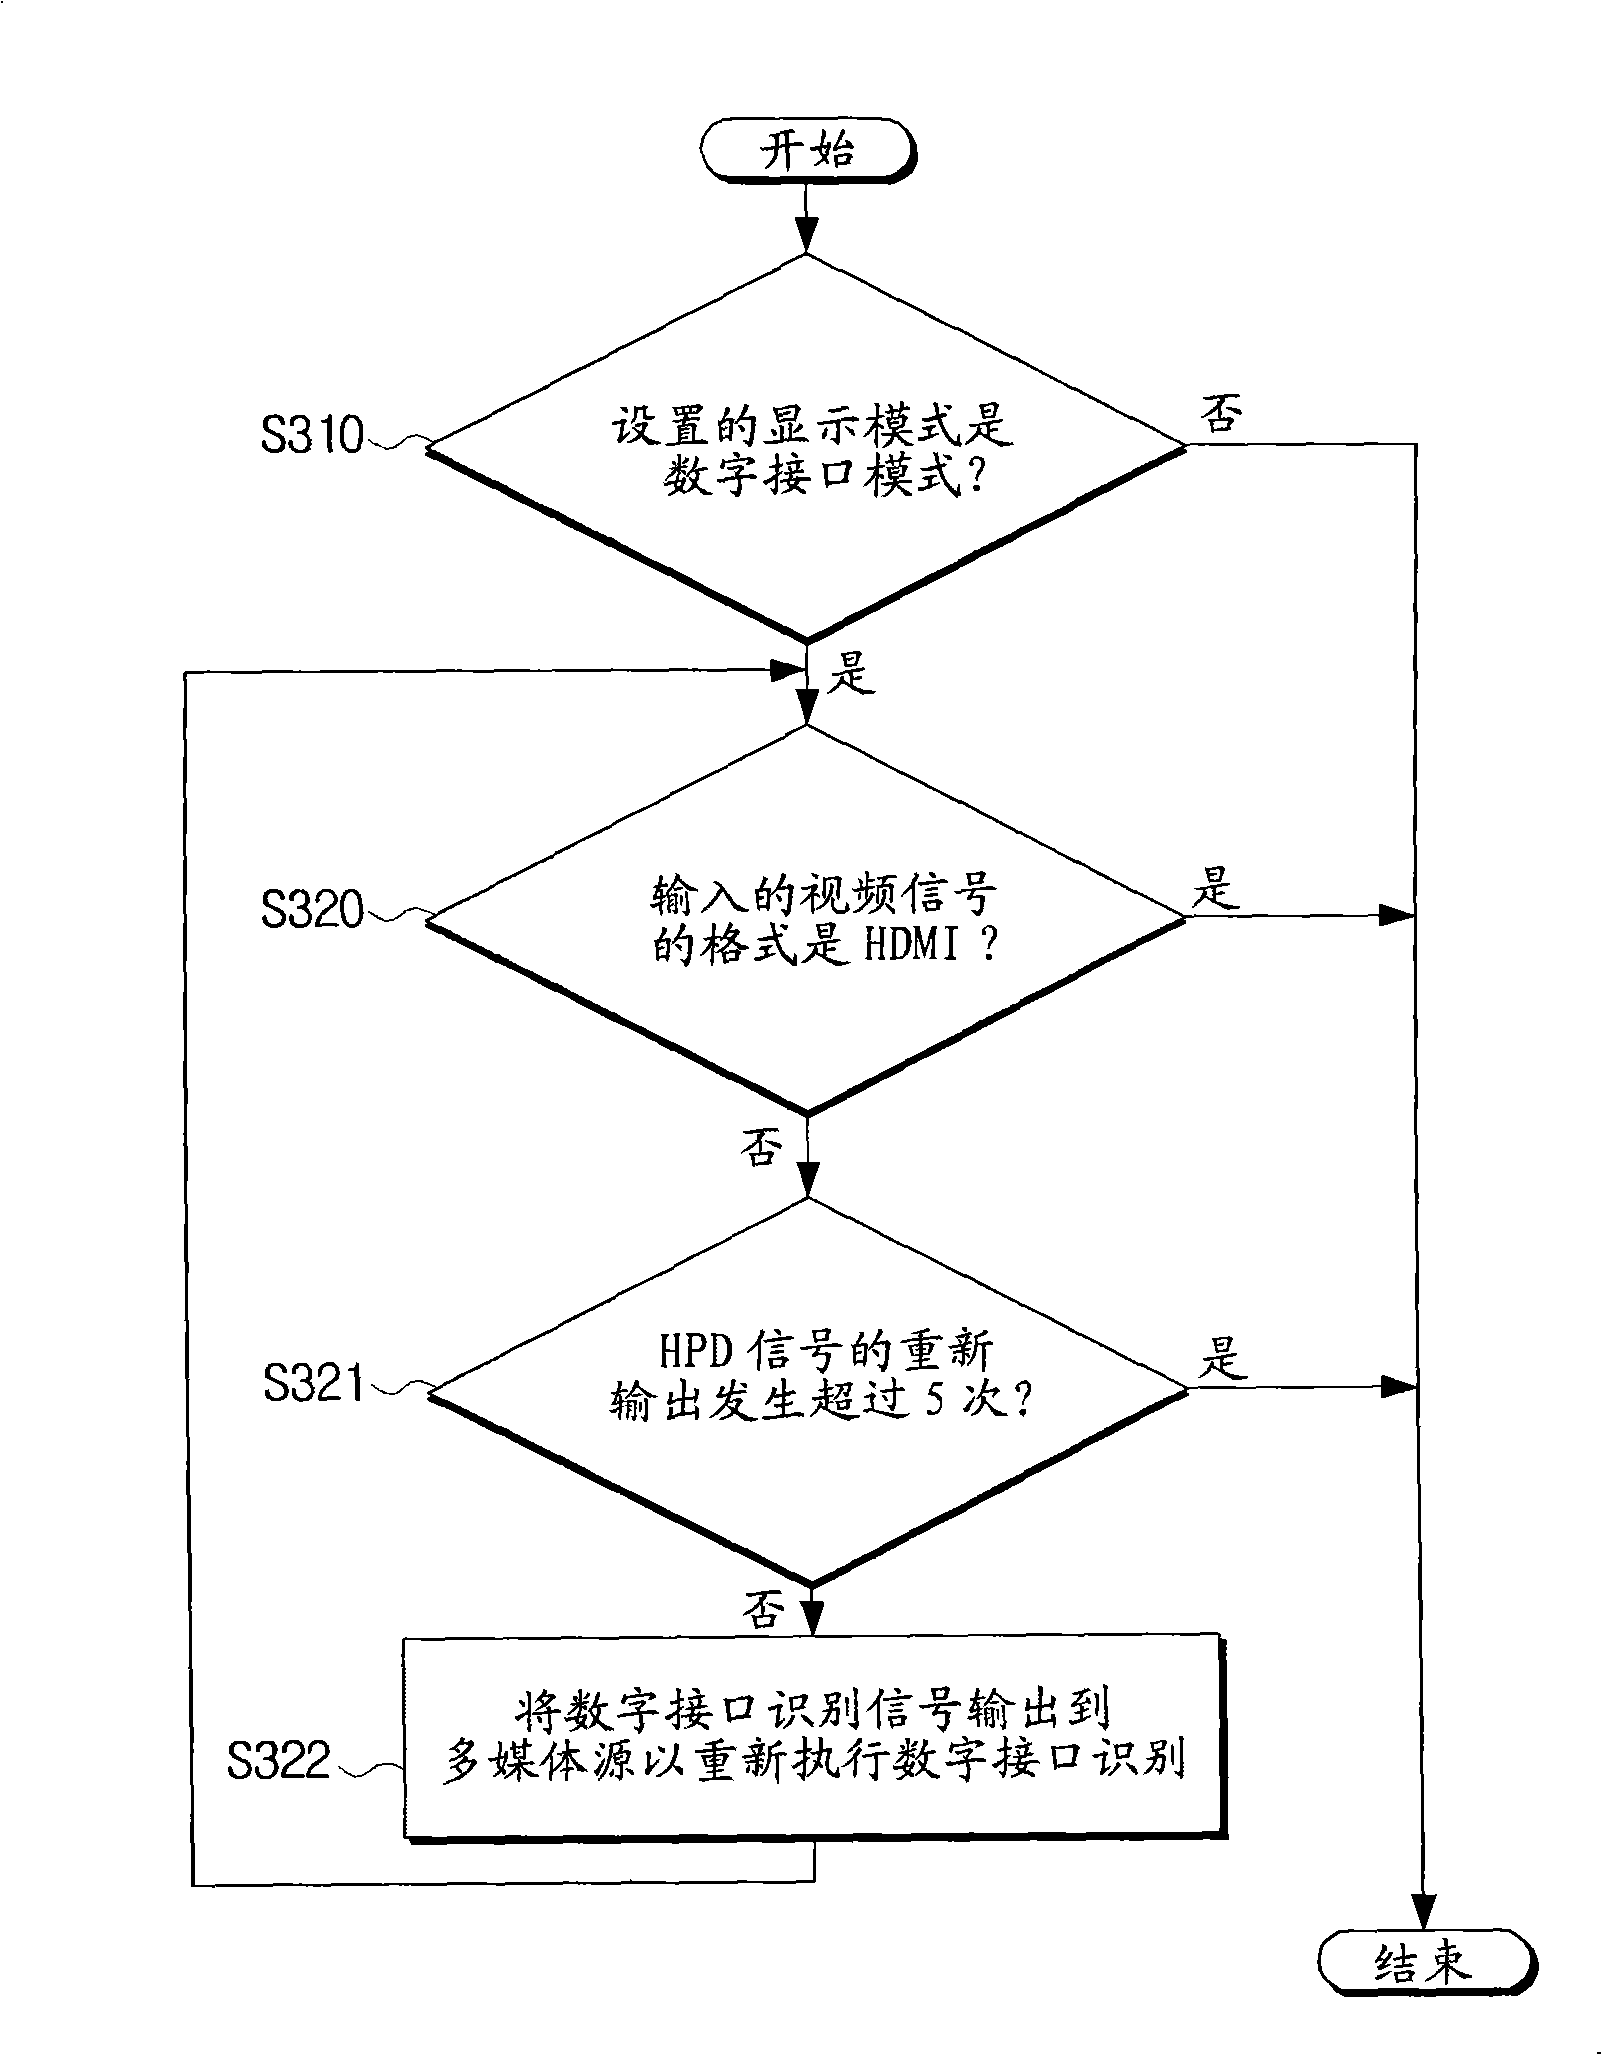 Video apparatus and method for recognizing digital interface thereof